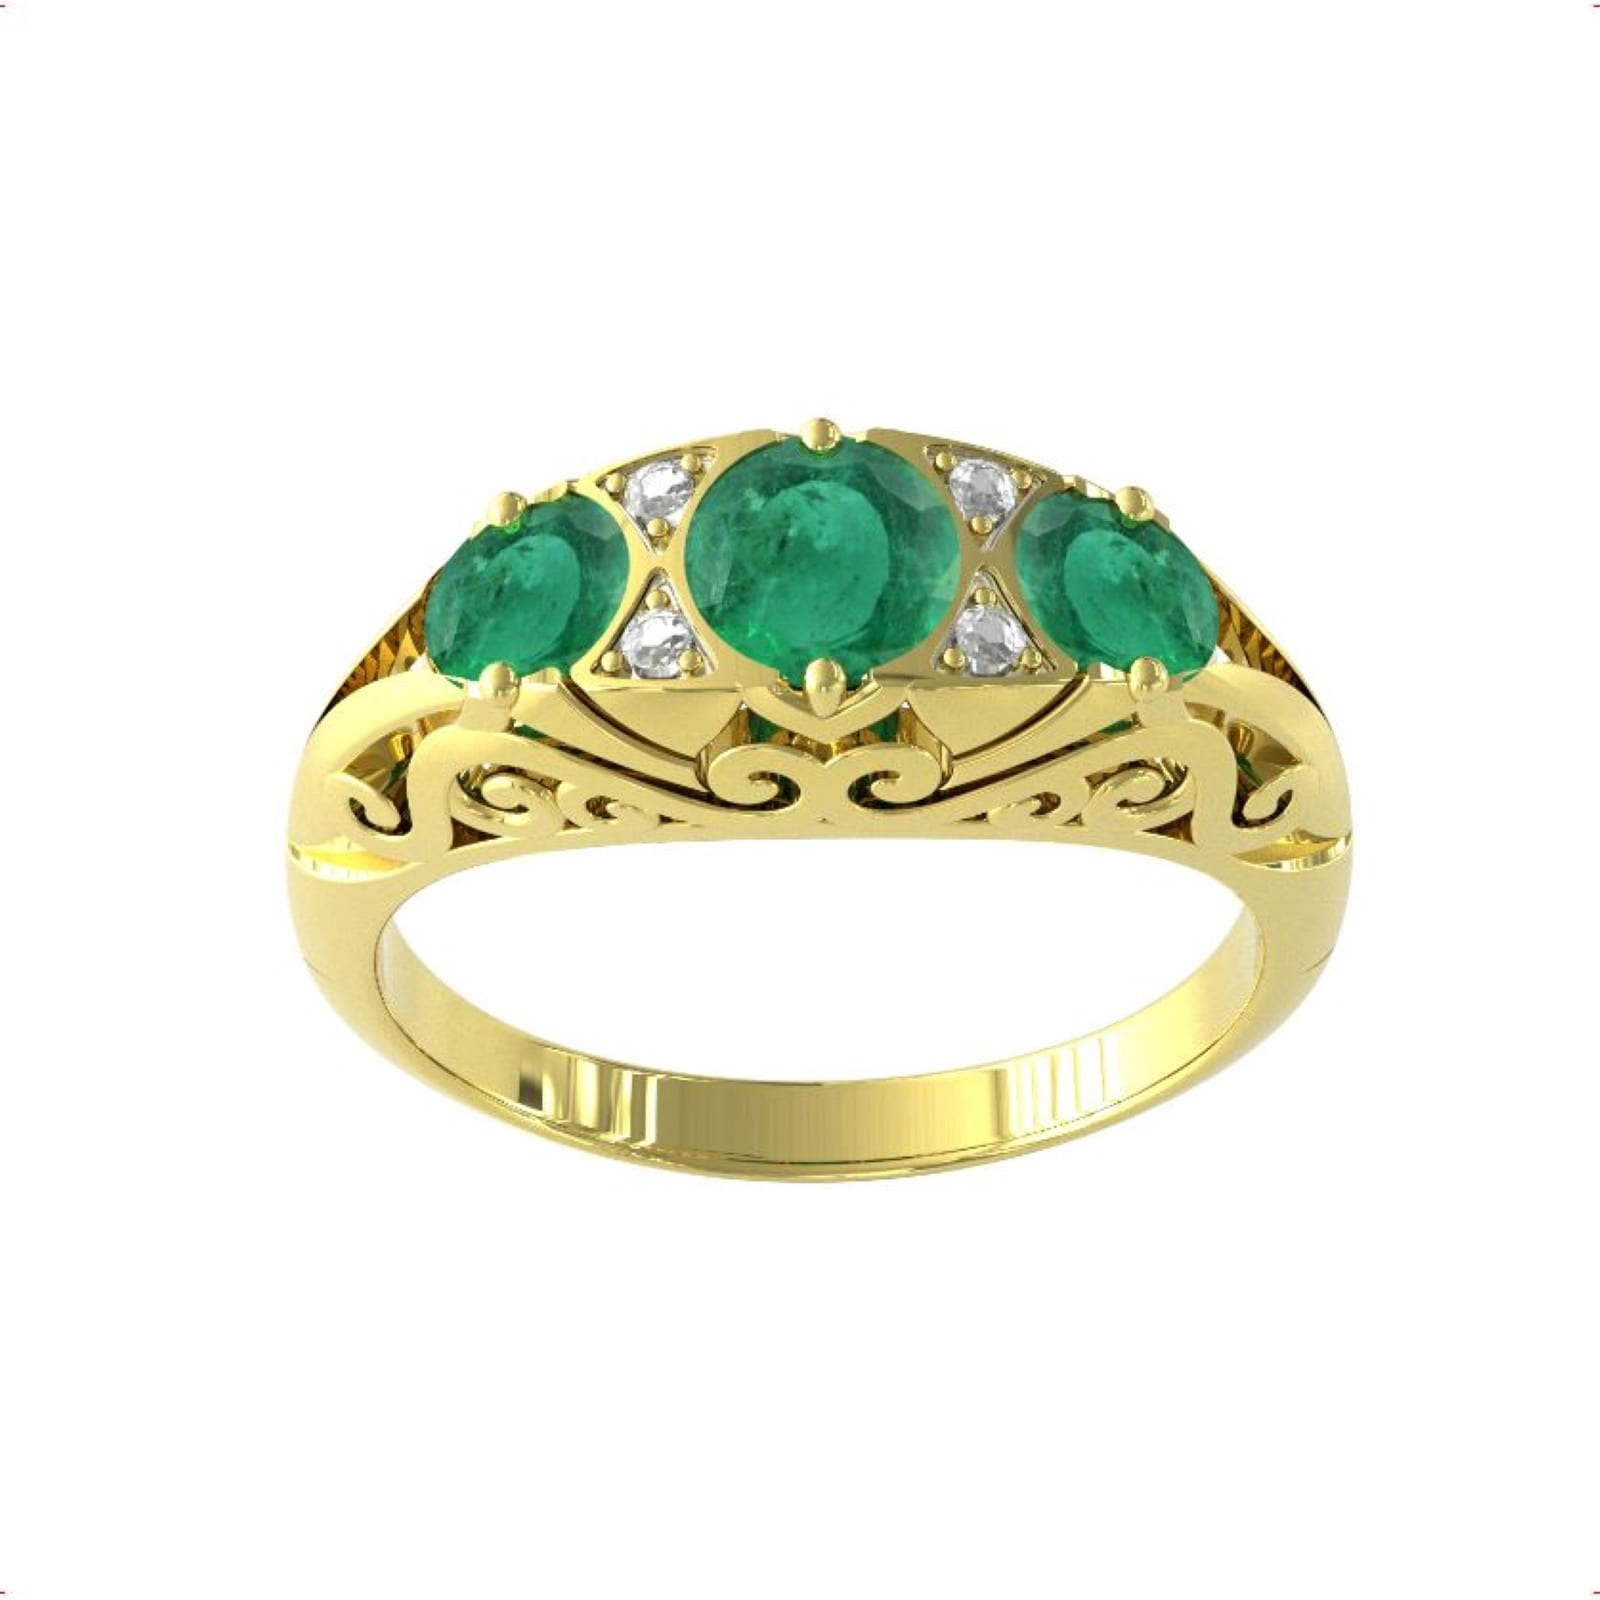 9ct Yellow Gold Victorian Style 3 Stone Emerald & Diamond Ring - Ring Size N